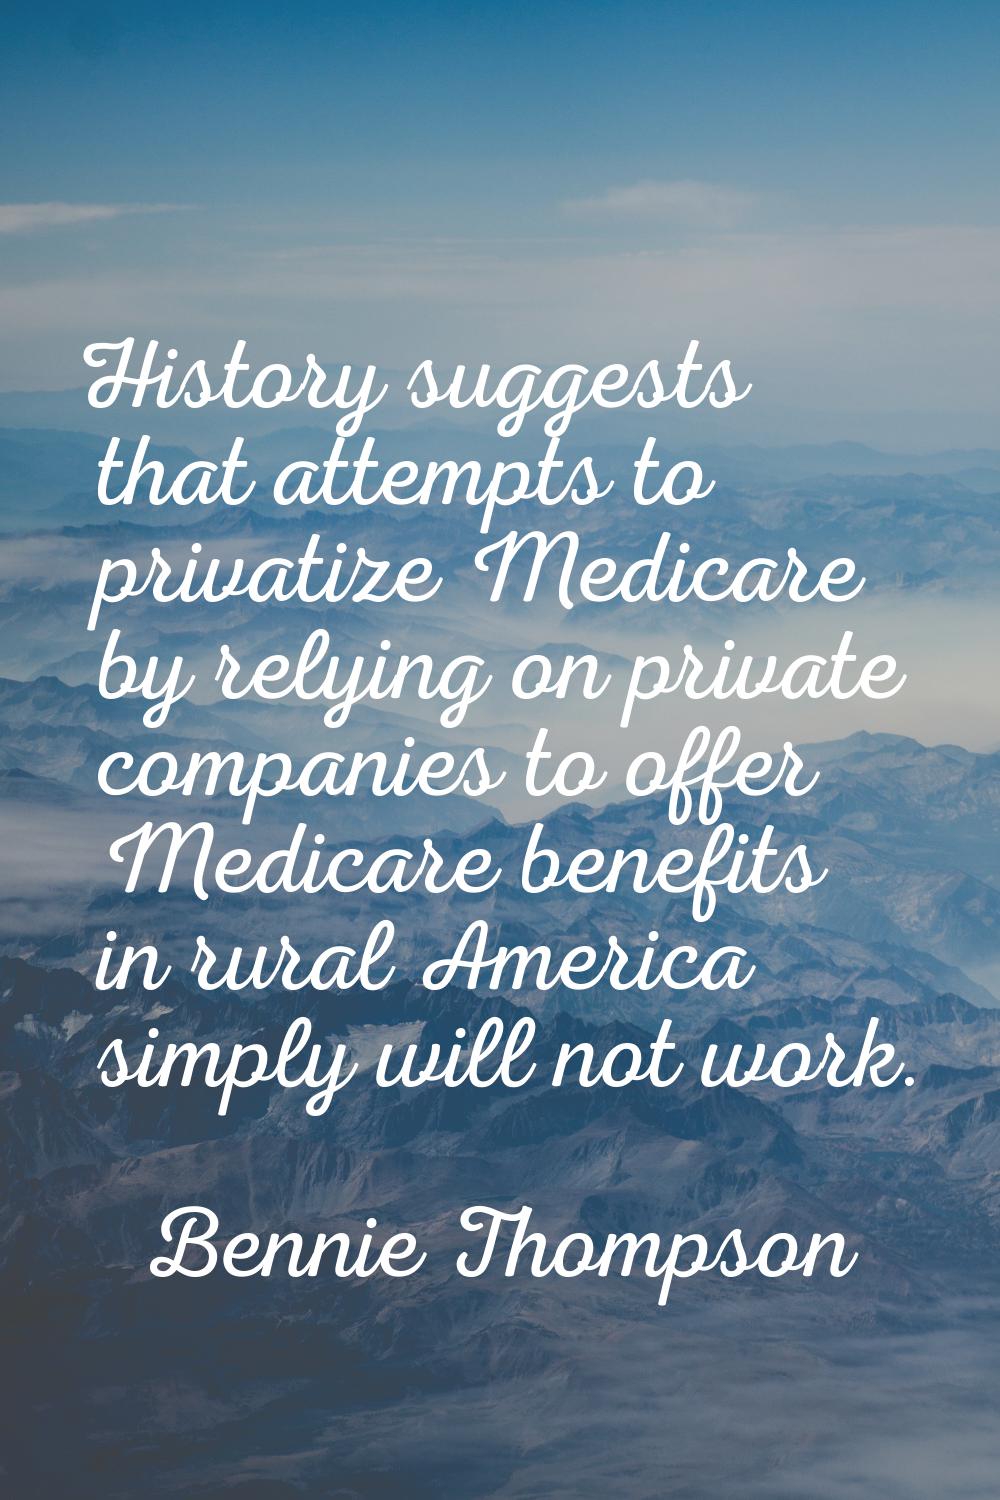 History suggests that attempts to privatize Medicare by relying on private companies to offer Medic